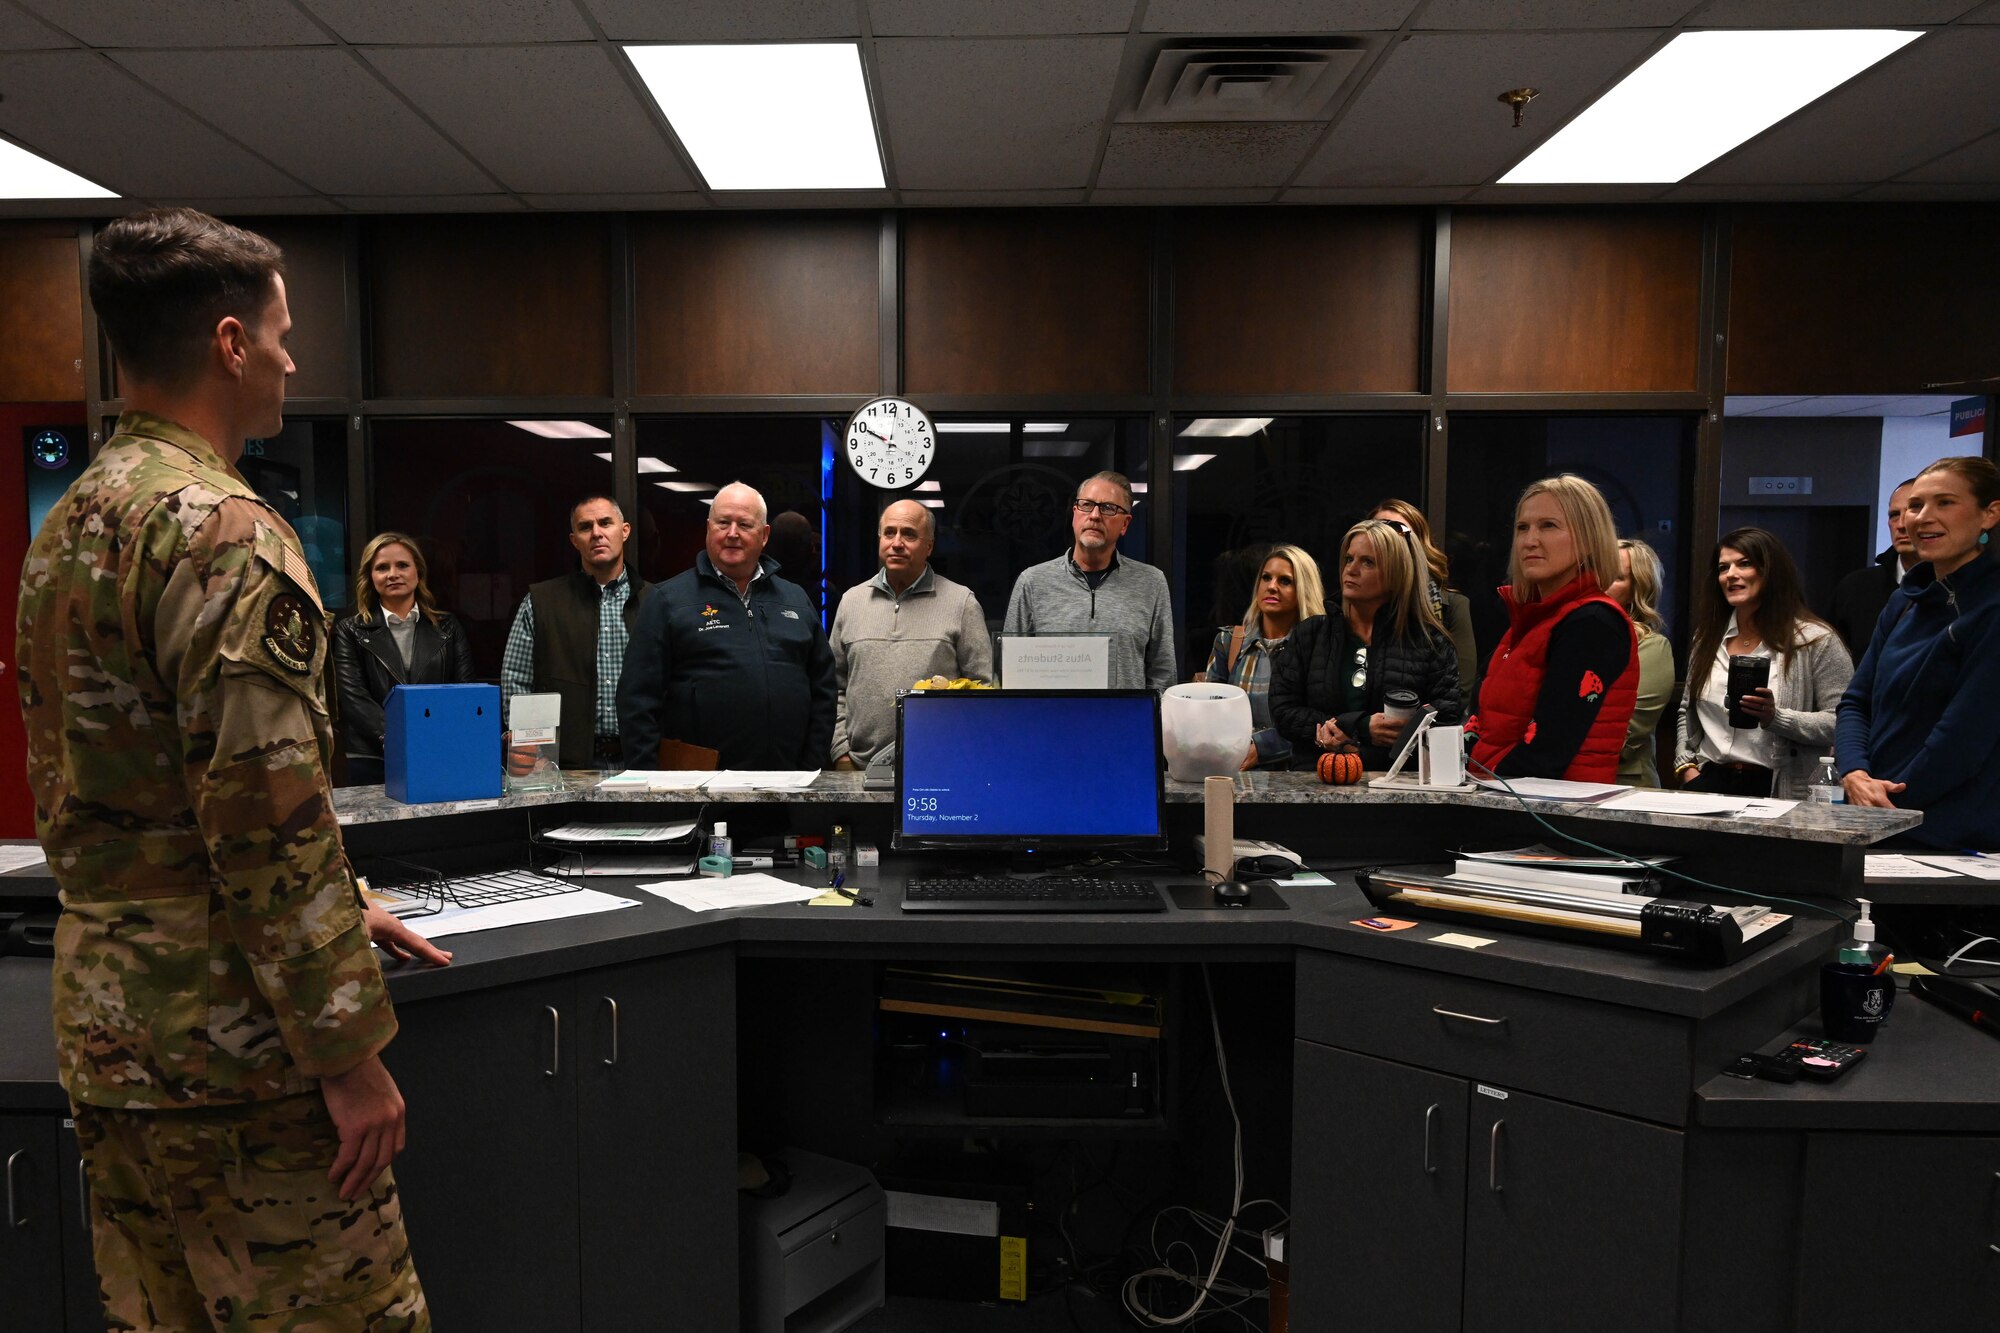 U.S. Air Force Capt. John Silvi, 97th Training Squadron (TRS) student flight commander, speaks to members of the Altus Military Affairs Committee during an orientation tour at Altus Air Force Base, Oklahoma, Nov. 2, 2023. The members interacted with Airmen across the base to learn more about the base and culture. (U.S. Air Force photo by Senior Airman Miyah Gray)